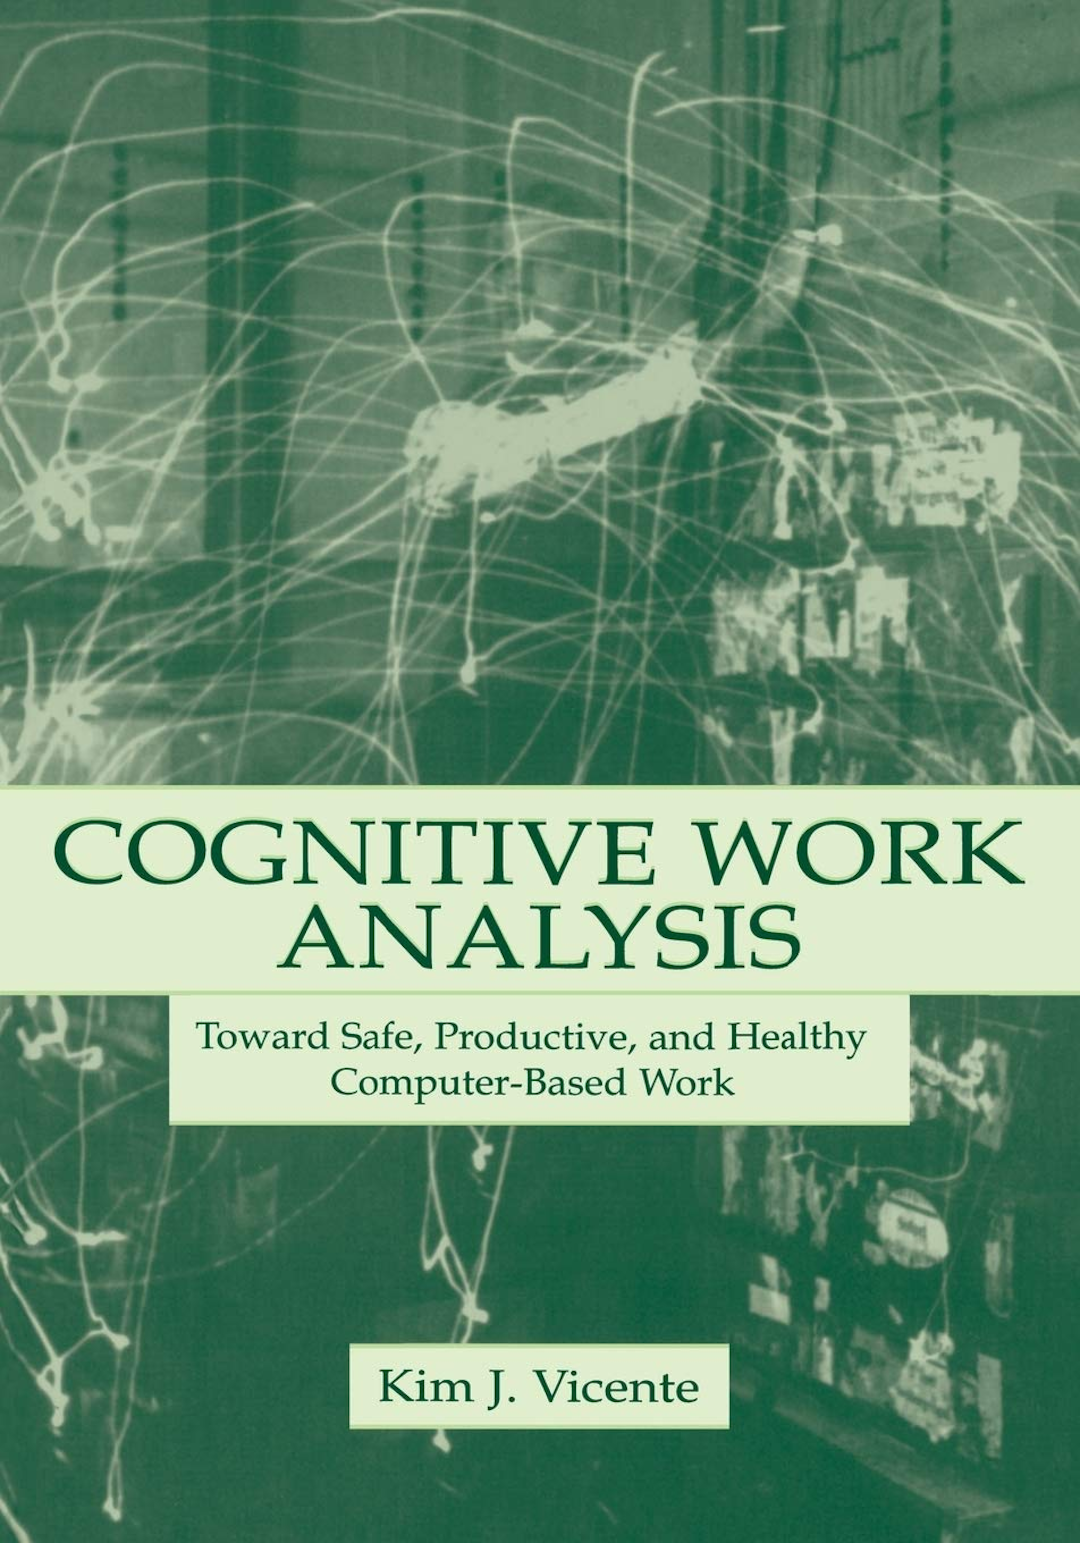 Cognitive Work Analysis: Toward Safe, Productive, and Healthy Computer-Based Work